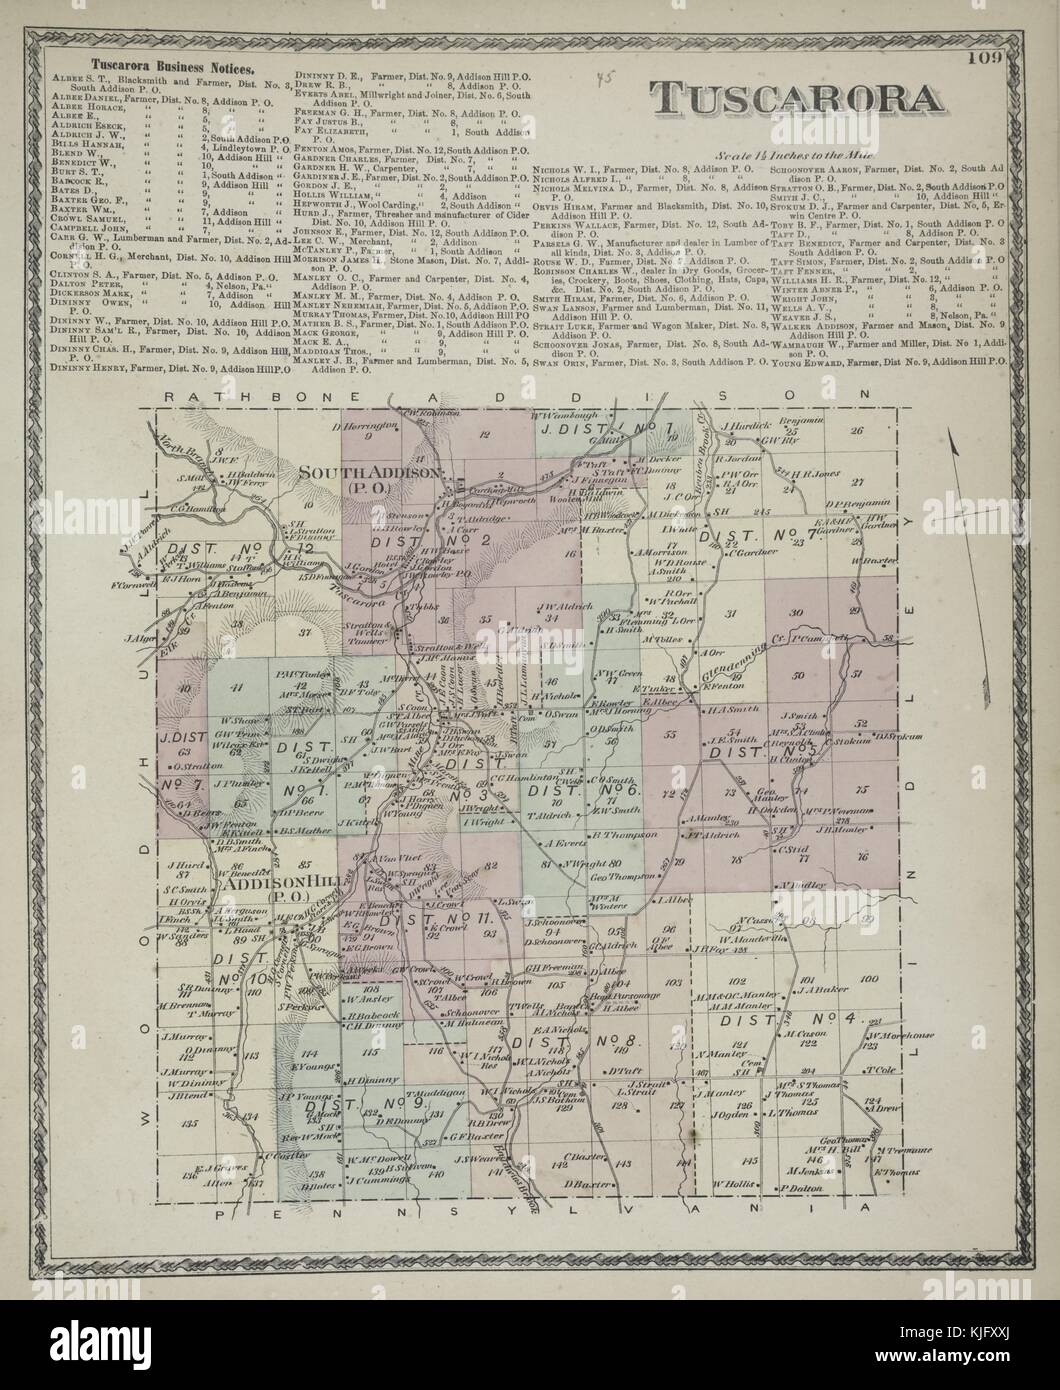 Engraved map image from an atlas, with original caption reading 'Tuscarora Business Notices, Tuscarora Township', 1873. From the New York Public Library. Stock Photo